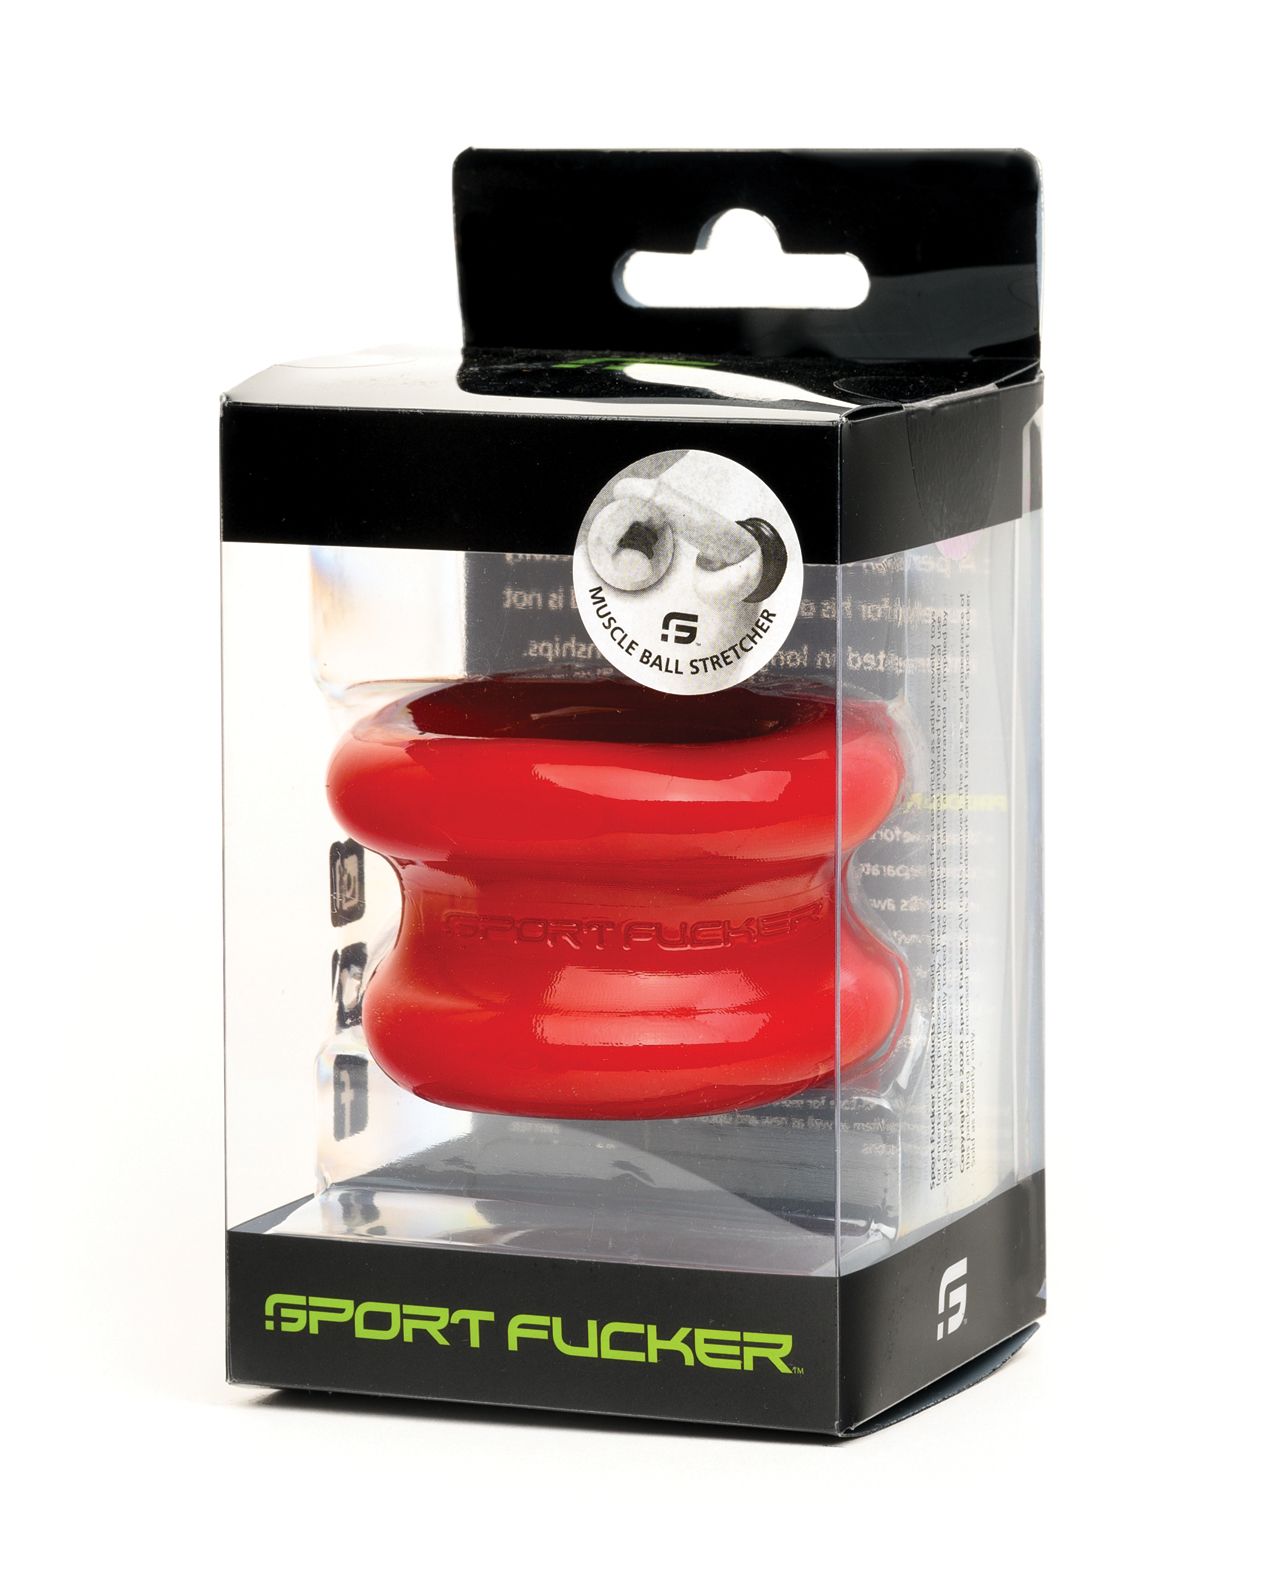 Sport Fucker Muscle Ball Stretcher - Red Shipmysextoys